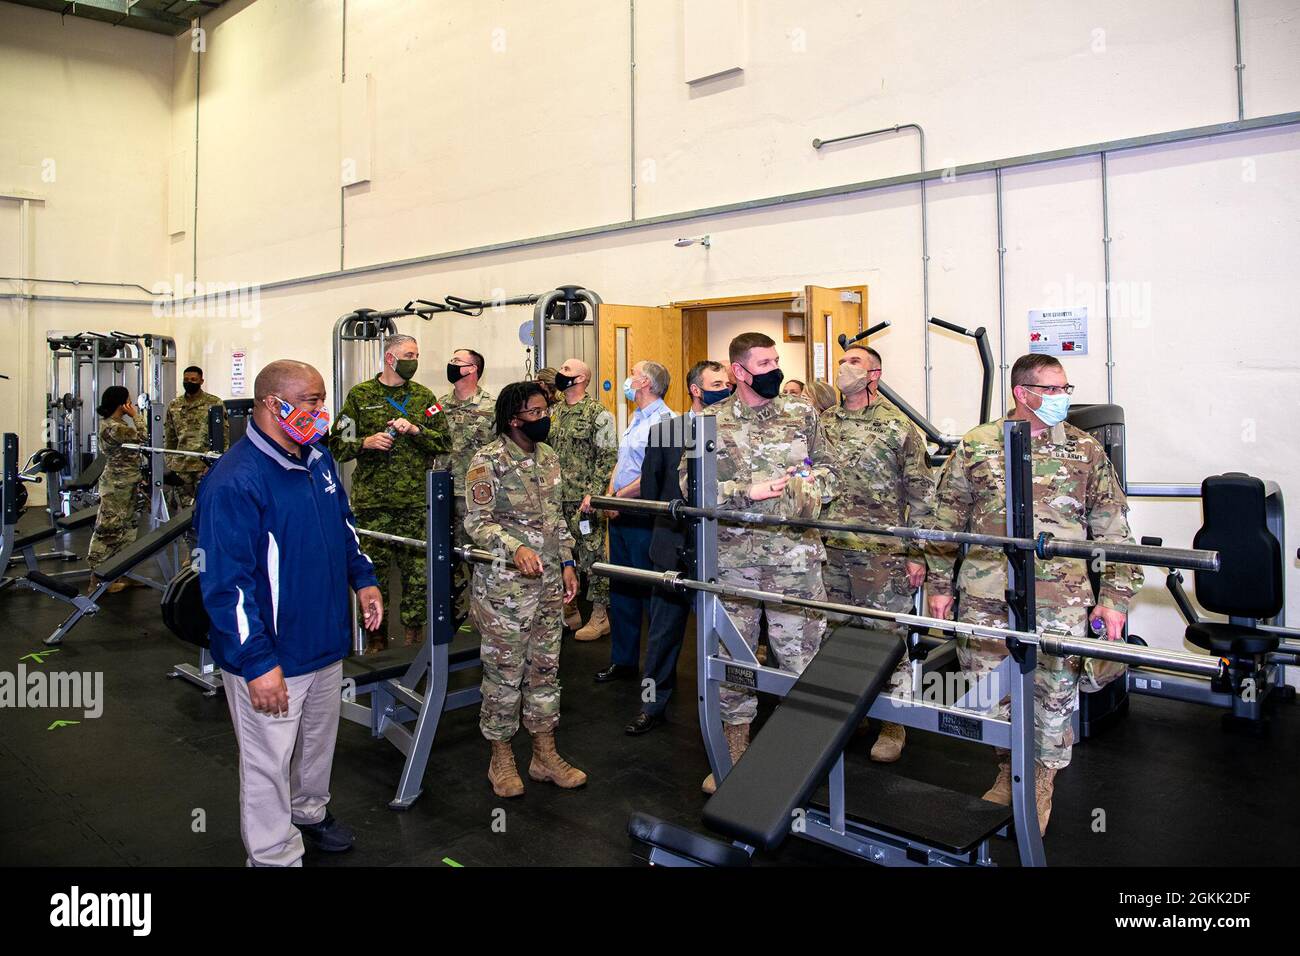 Leadership from RAF Alconbury and RAF Molesworth, tour the renovated fitness center at RAF Molesworth, England, May 11, 2021. The fitness center at Molesworth reopened after months of refurbishing and renovations. Stock Photo